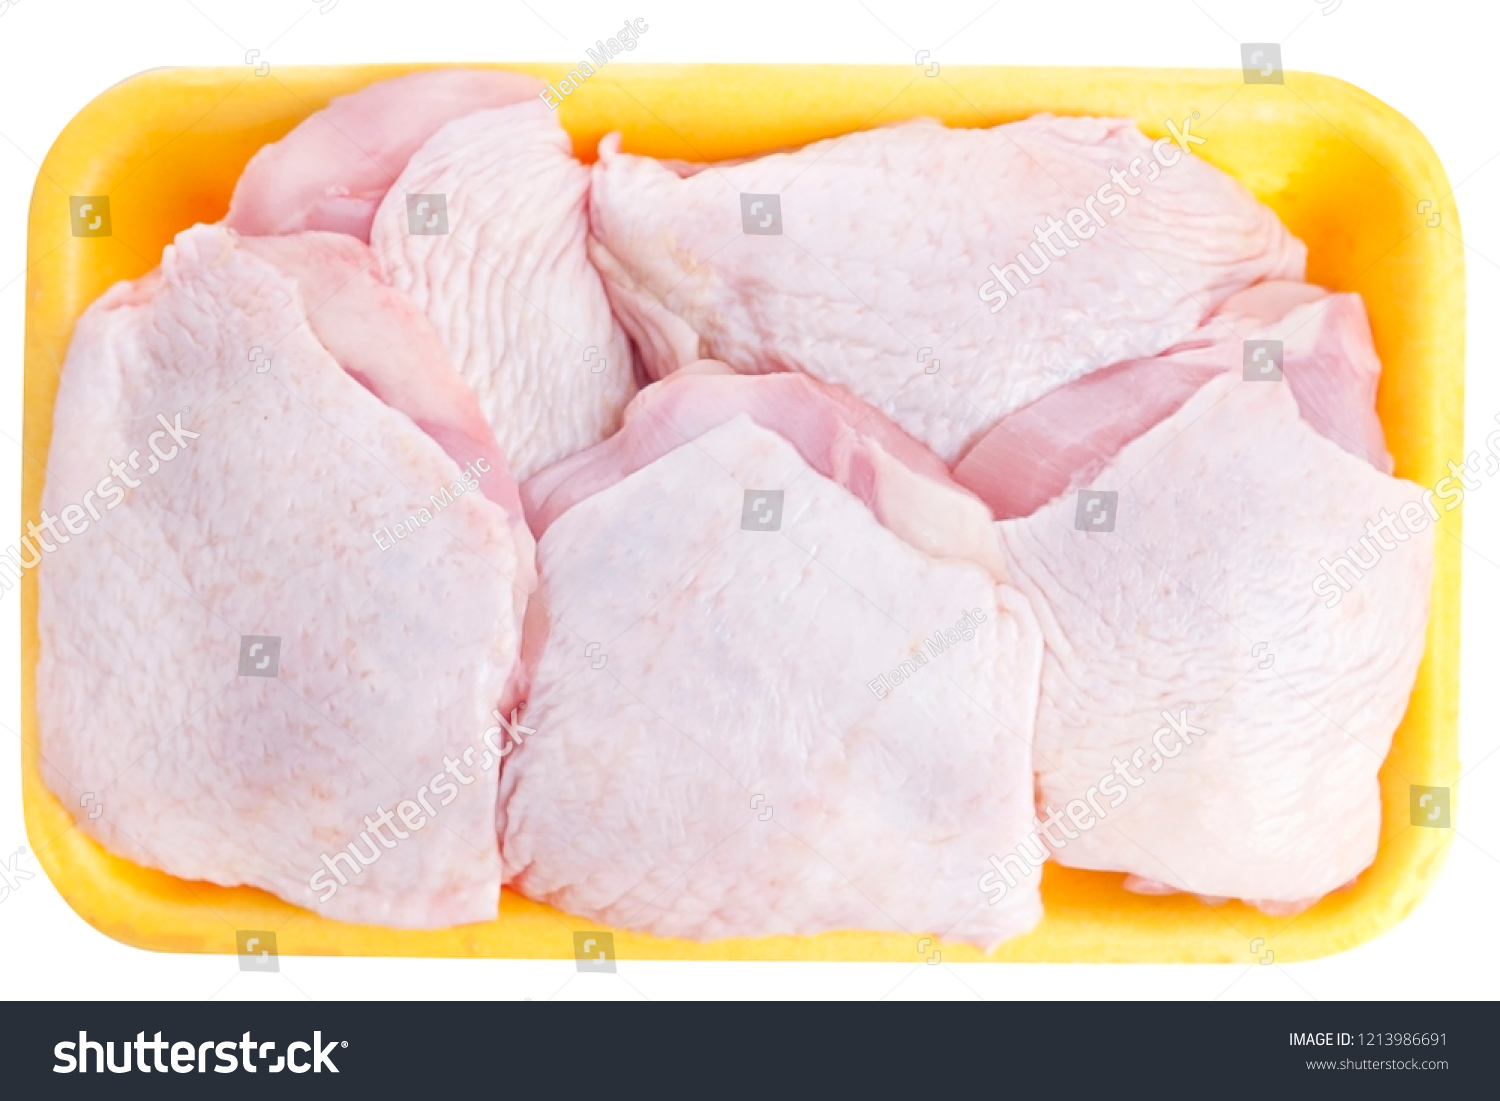 Download Raw Chicken Yellow Plastic Tray Isolated Food And Drink Stock Image 1213986691 PSD Mockup Templates